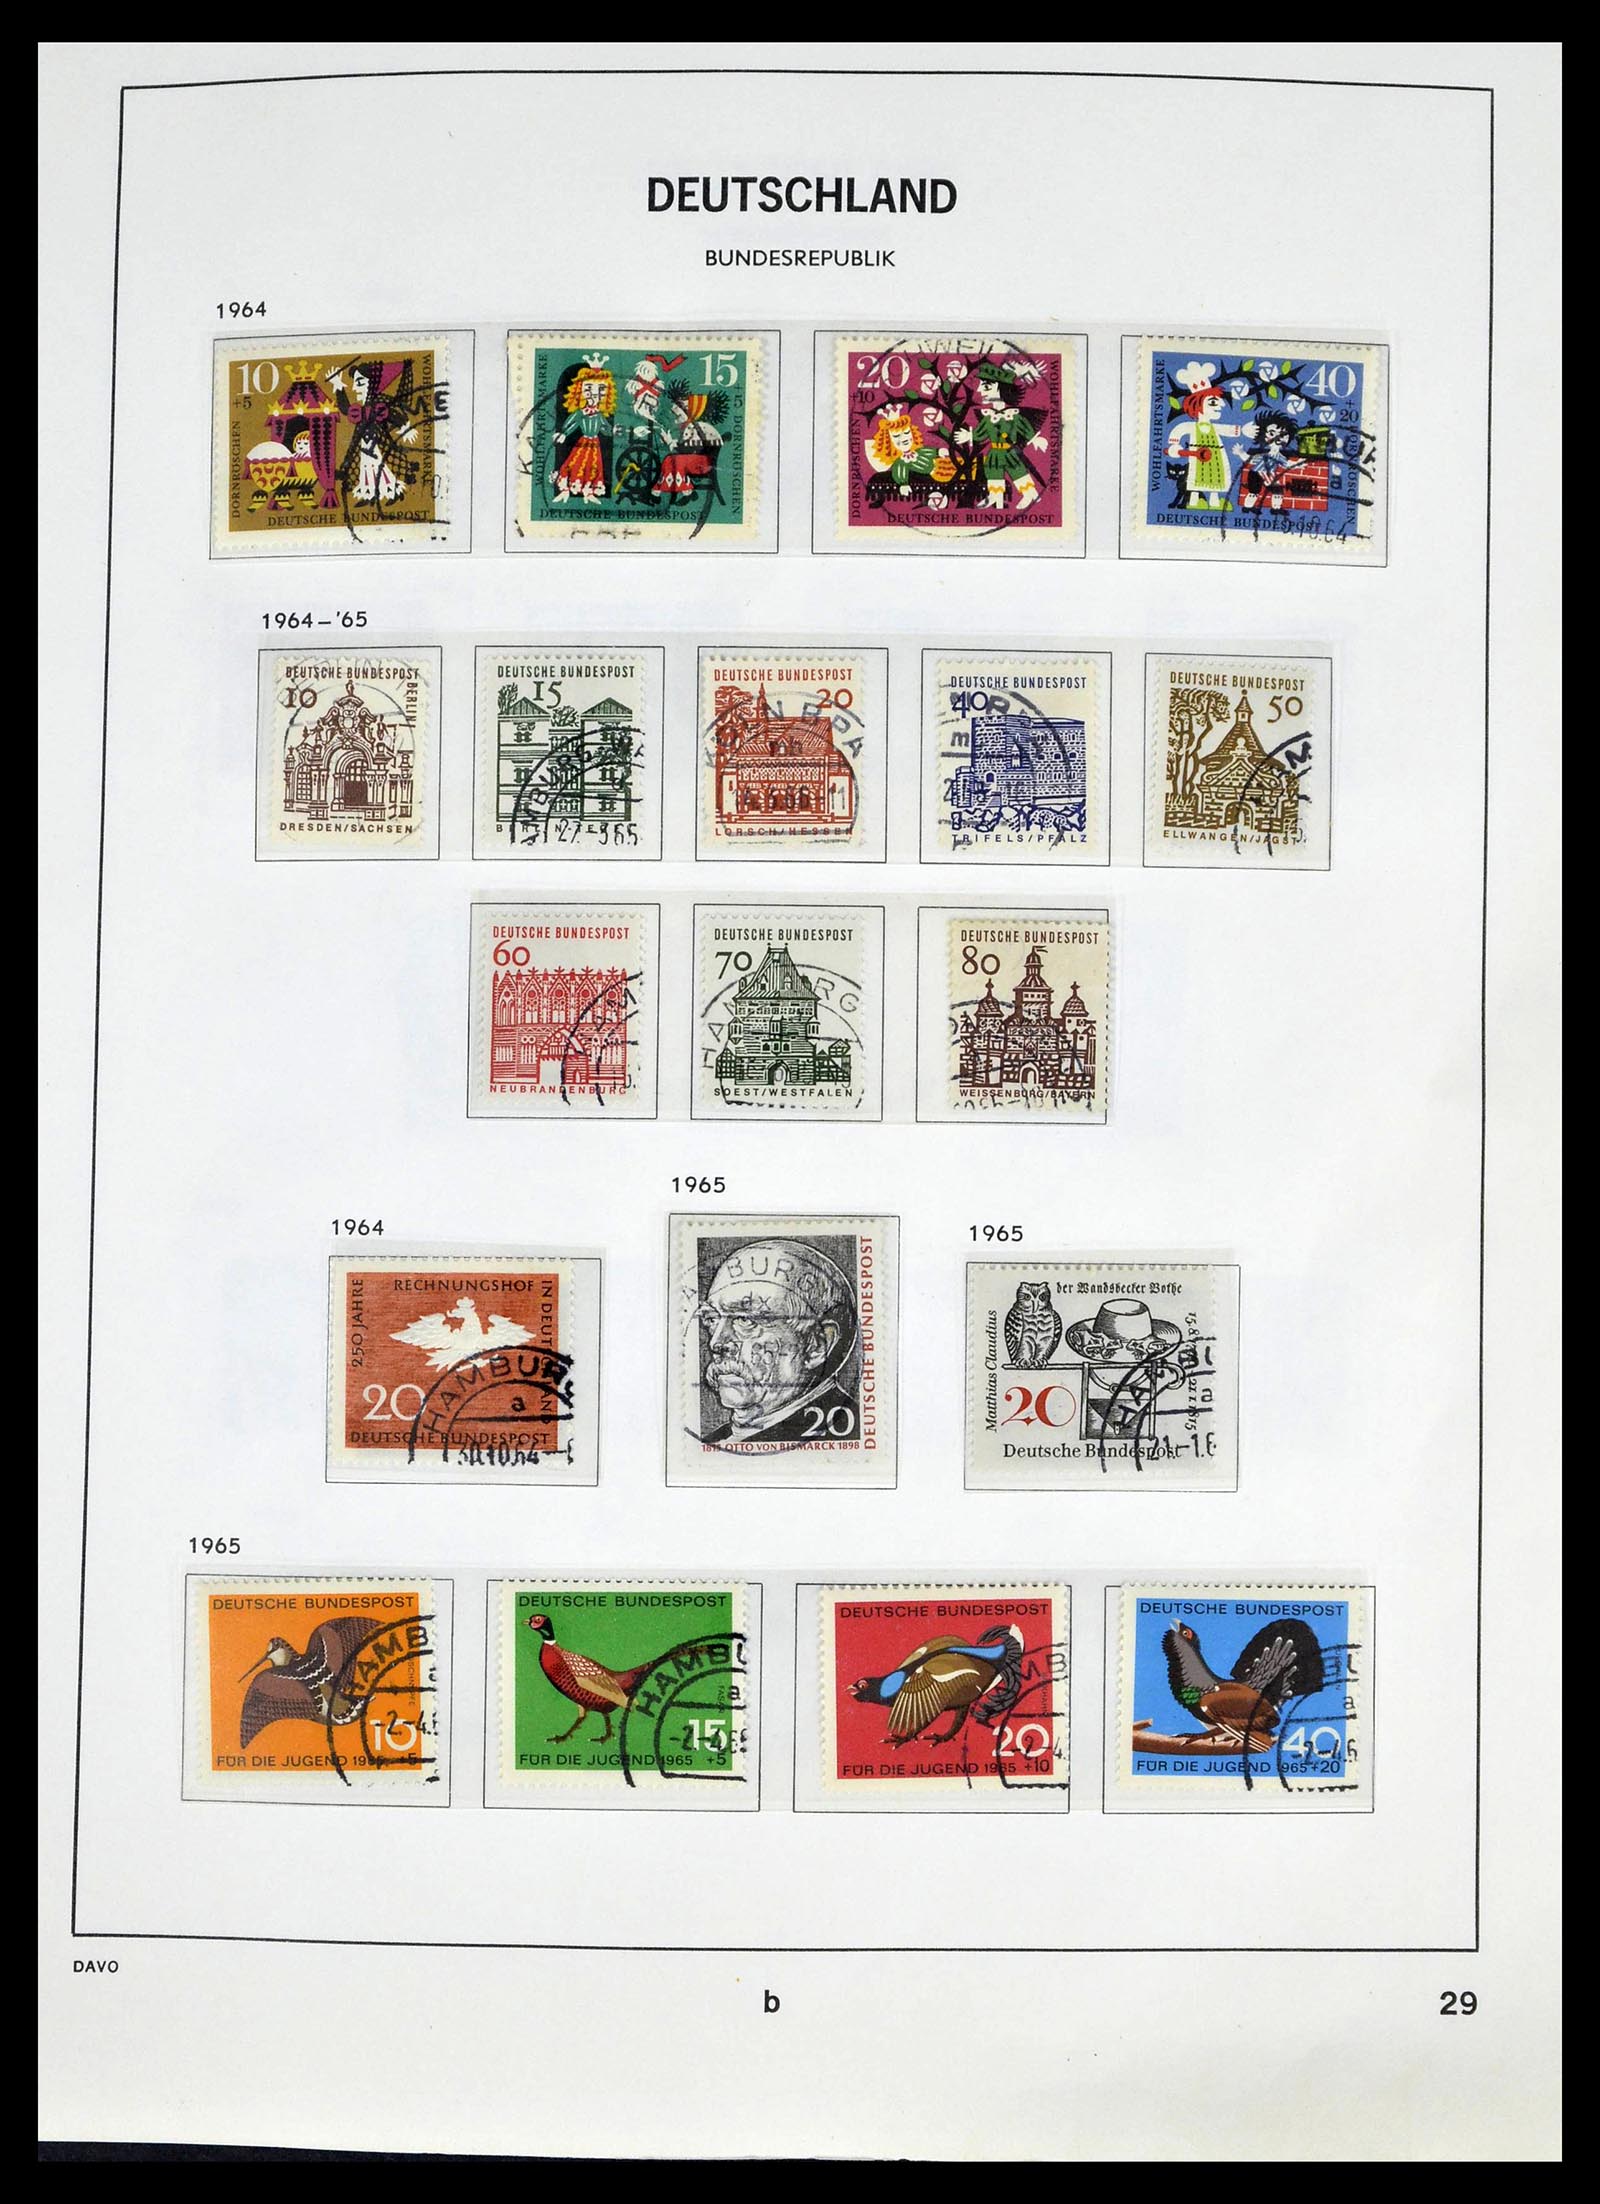 39326 0025 - Stamp collection 39326 Bundespost 1949-2003.